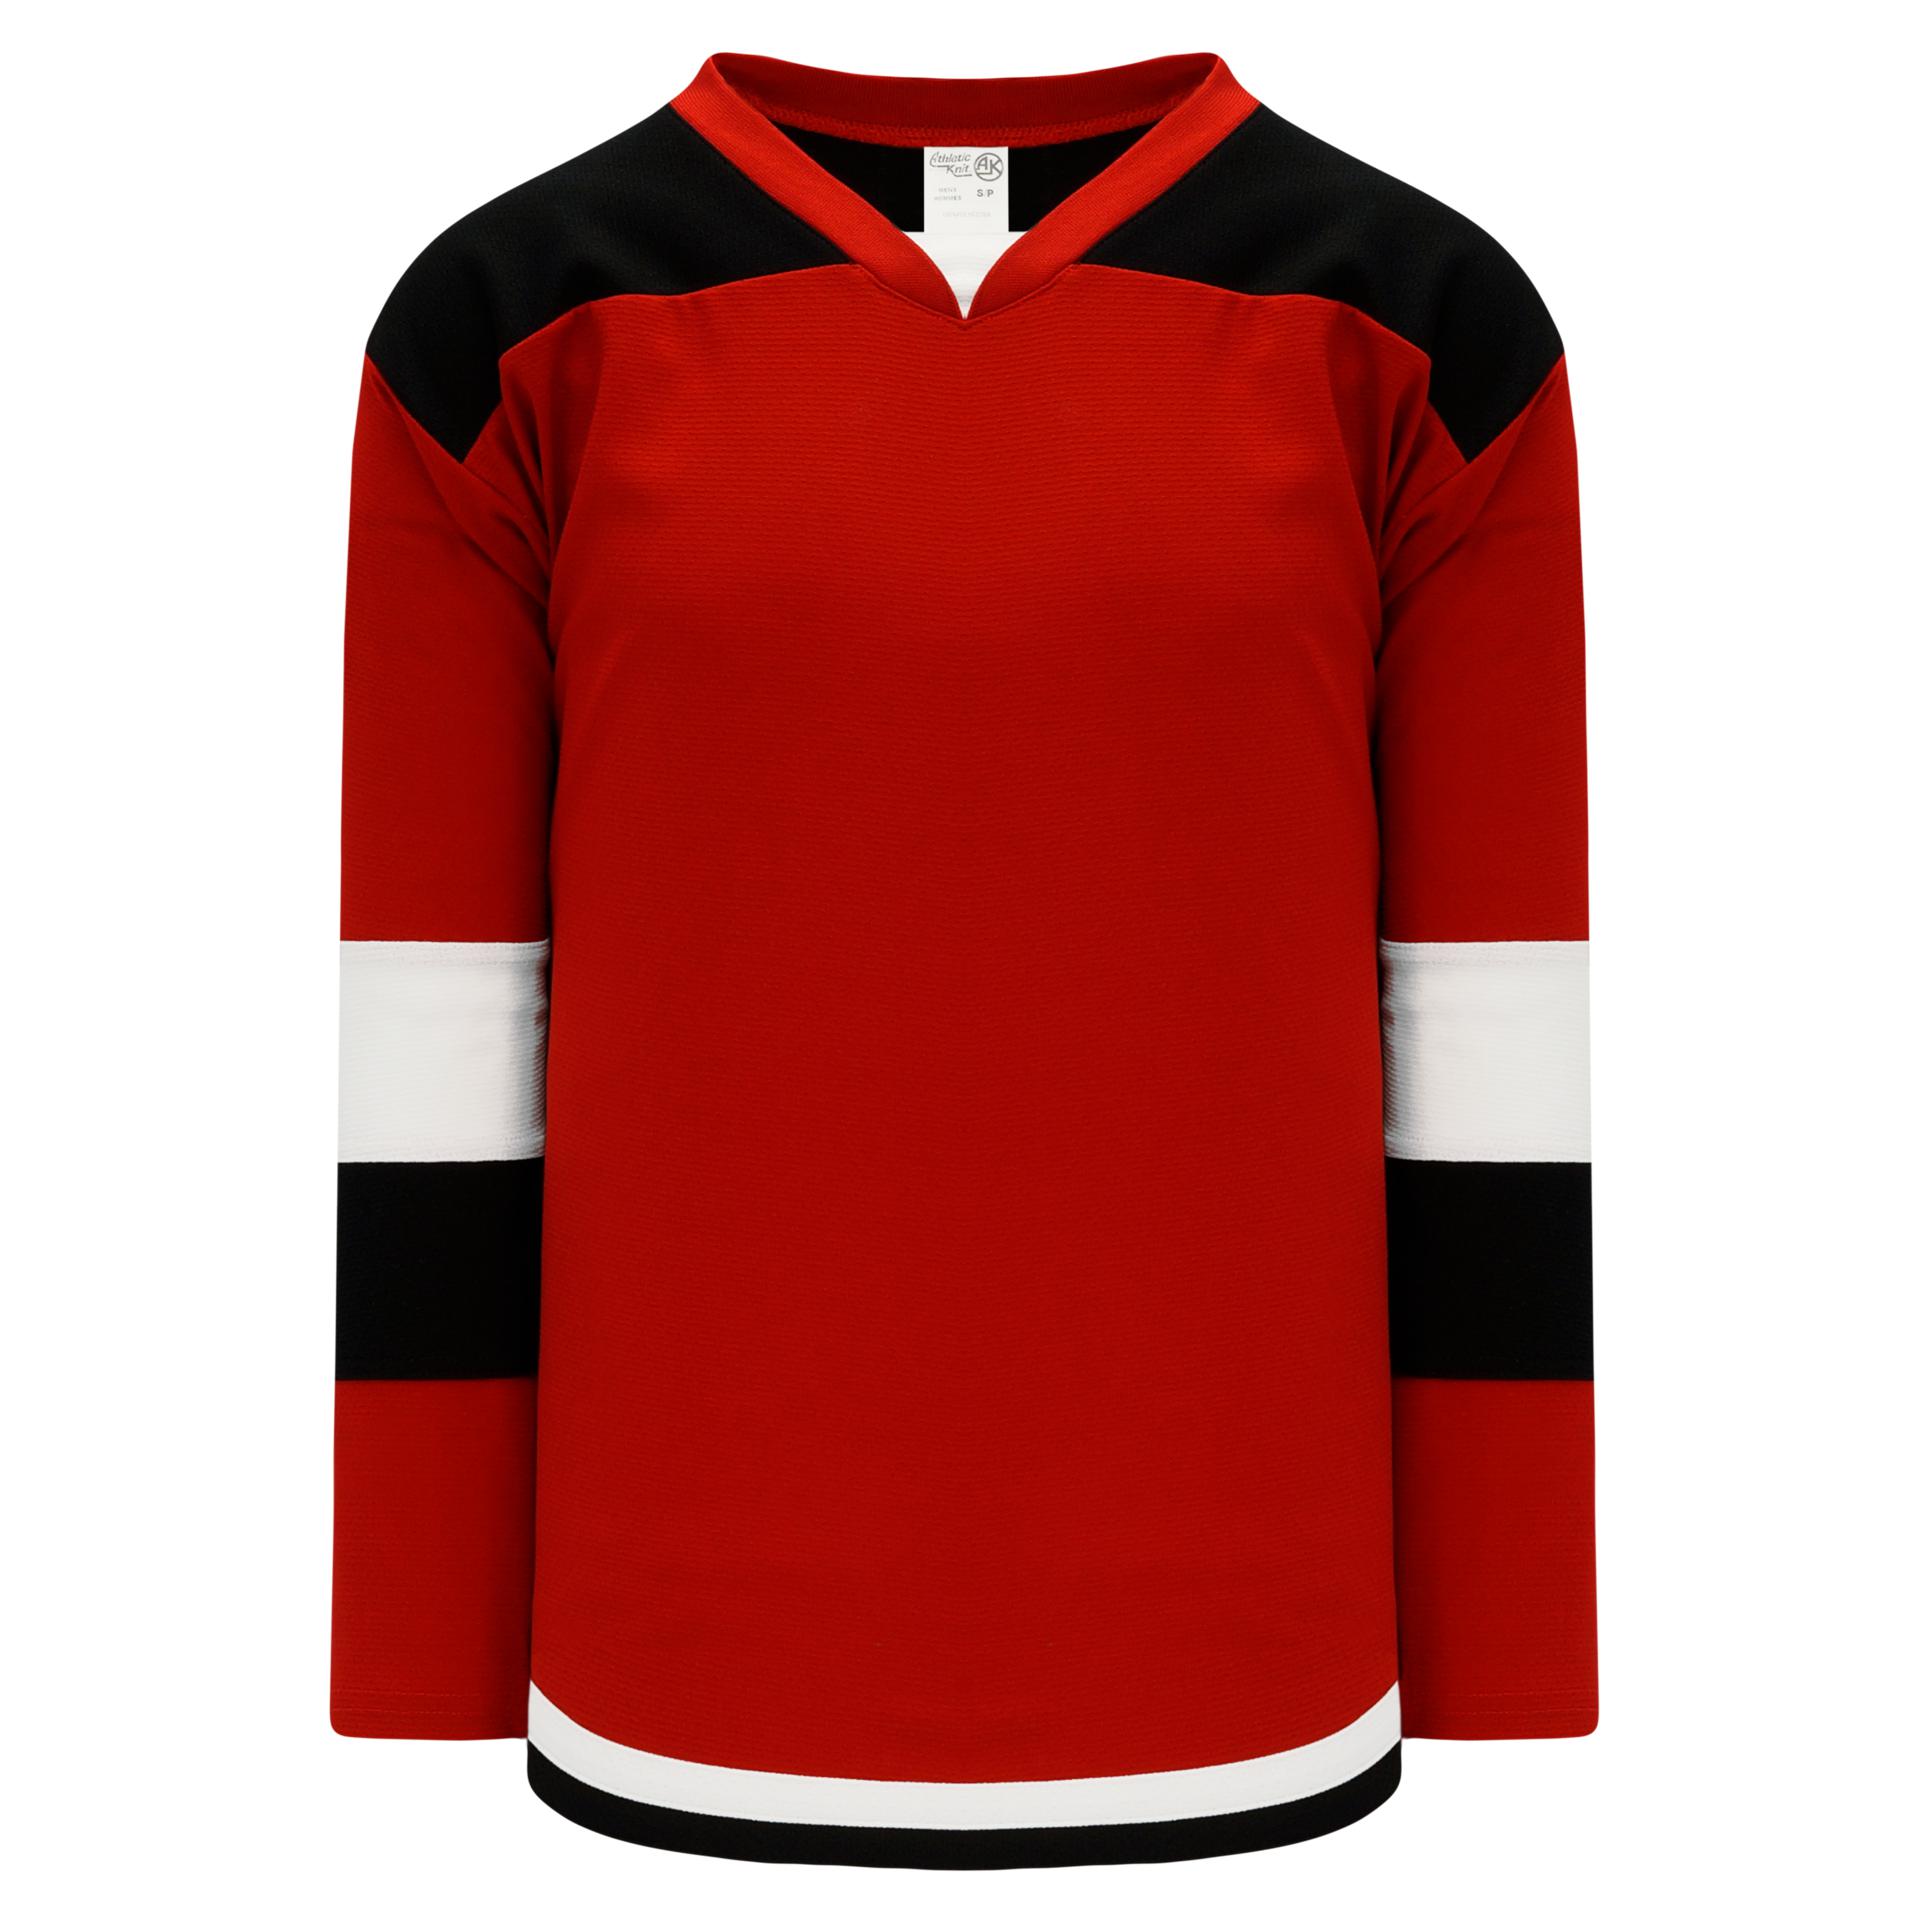 blank red jersey